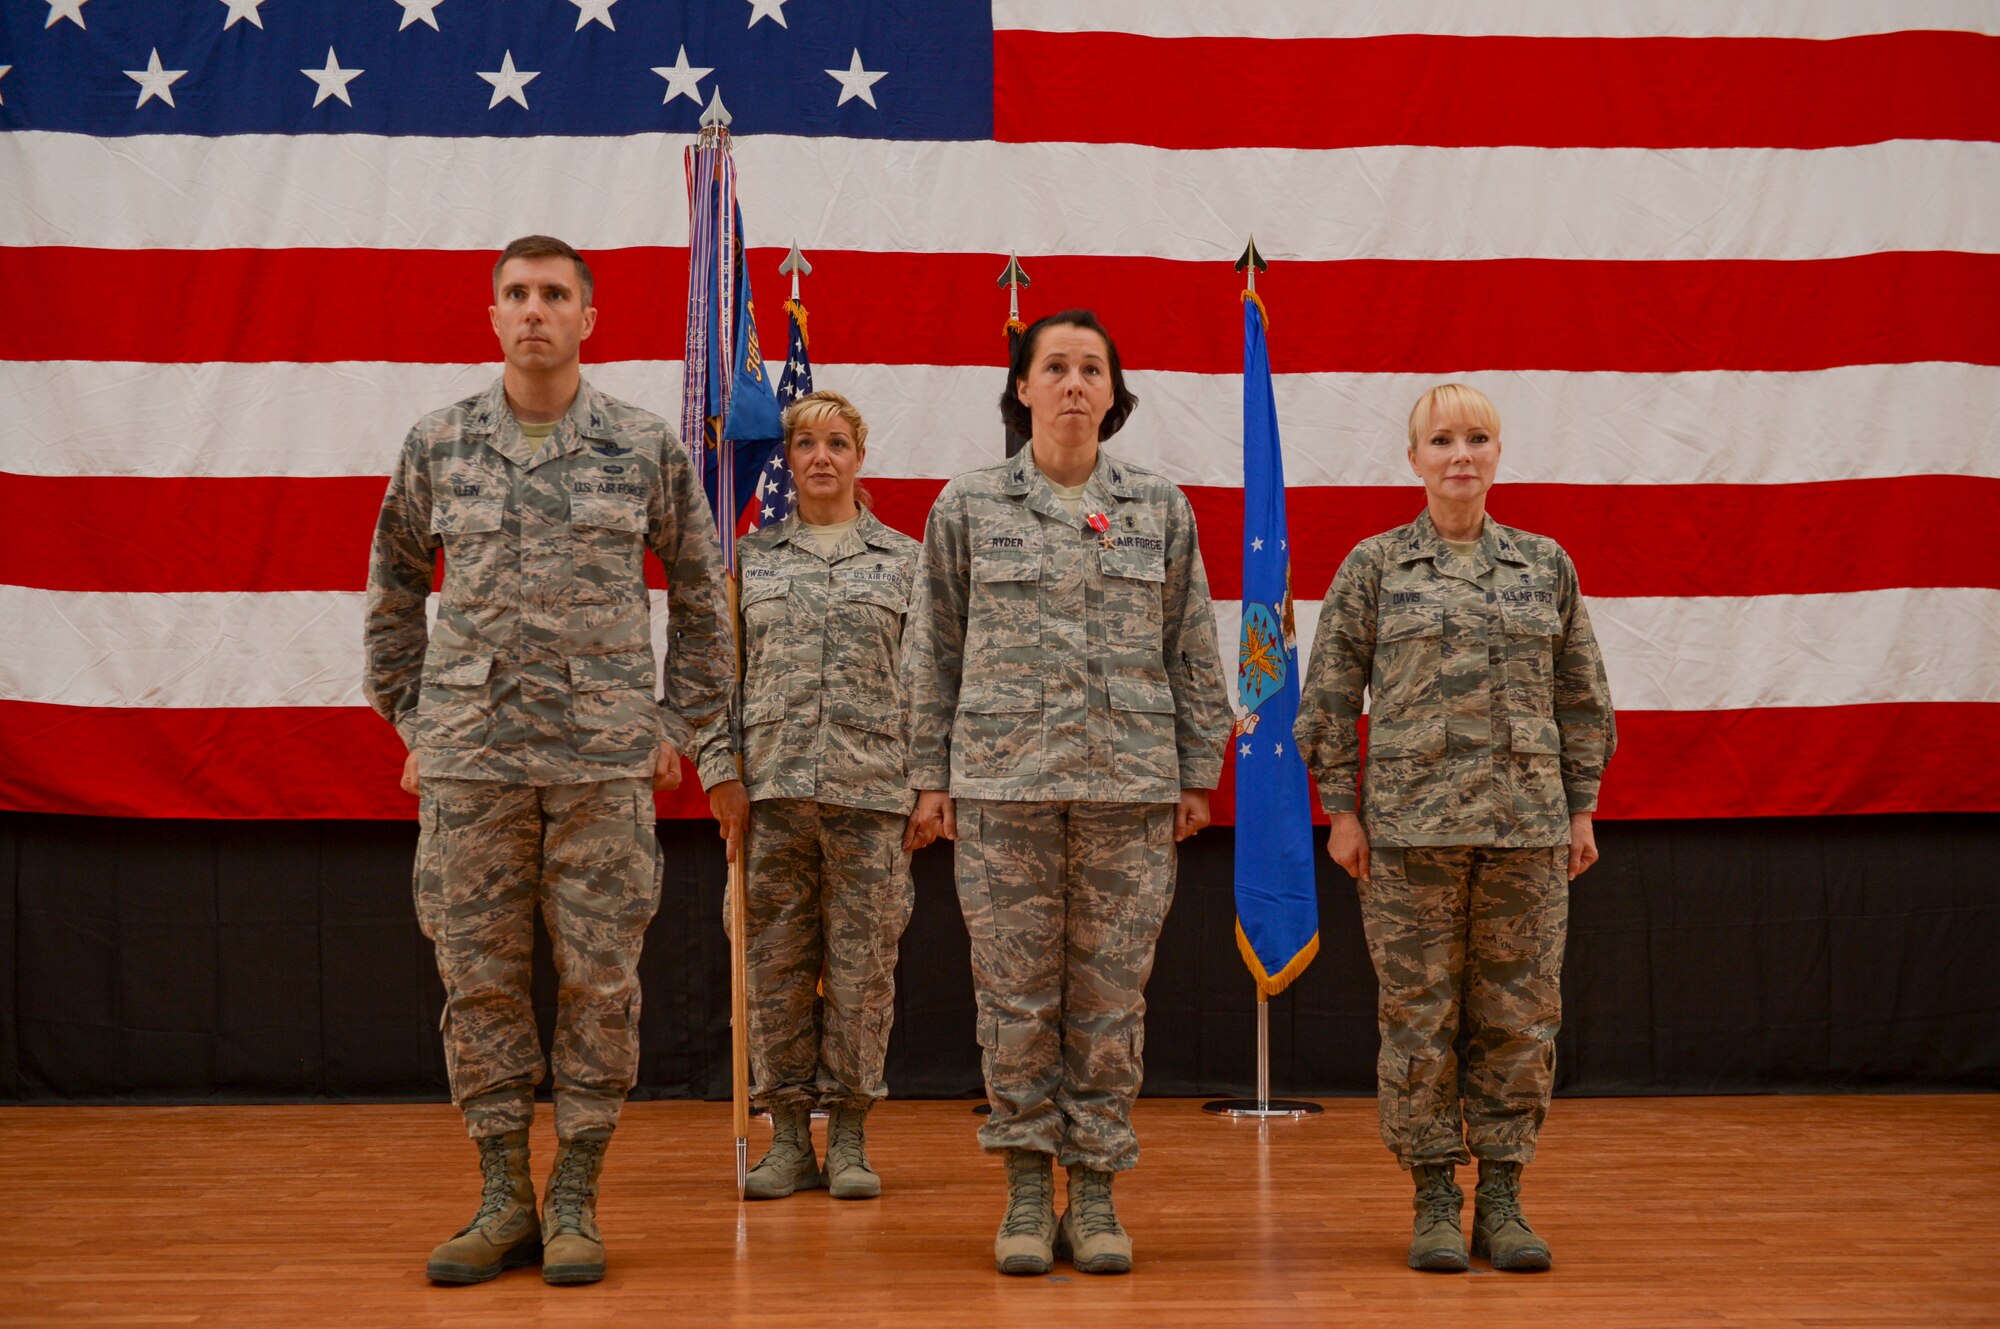 Col. John Klein (left), 386th Air Expeditionary Wing commander, Col. Jeannine Ryder (middle), 386th Expeditionary Medical Group outgoing commander and Col. Susan Davis (right), incoming 386th EMDG commander stand at attention during a change of command ceremony held June 8, 2014 at The Rock. The 386th EMDG, supports the wing mission by ensuring a healthy and fit force and providing combat medical support, dental and force health protection for the Department of Defense and U.S. Forces throughout Southwest Asia. (U.S. Air Force photo by Staff Sgt. Jeremy Bowcock)